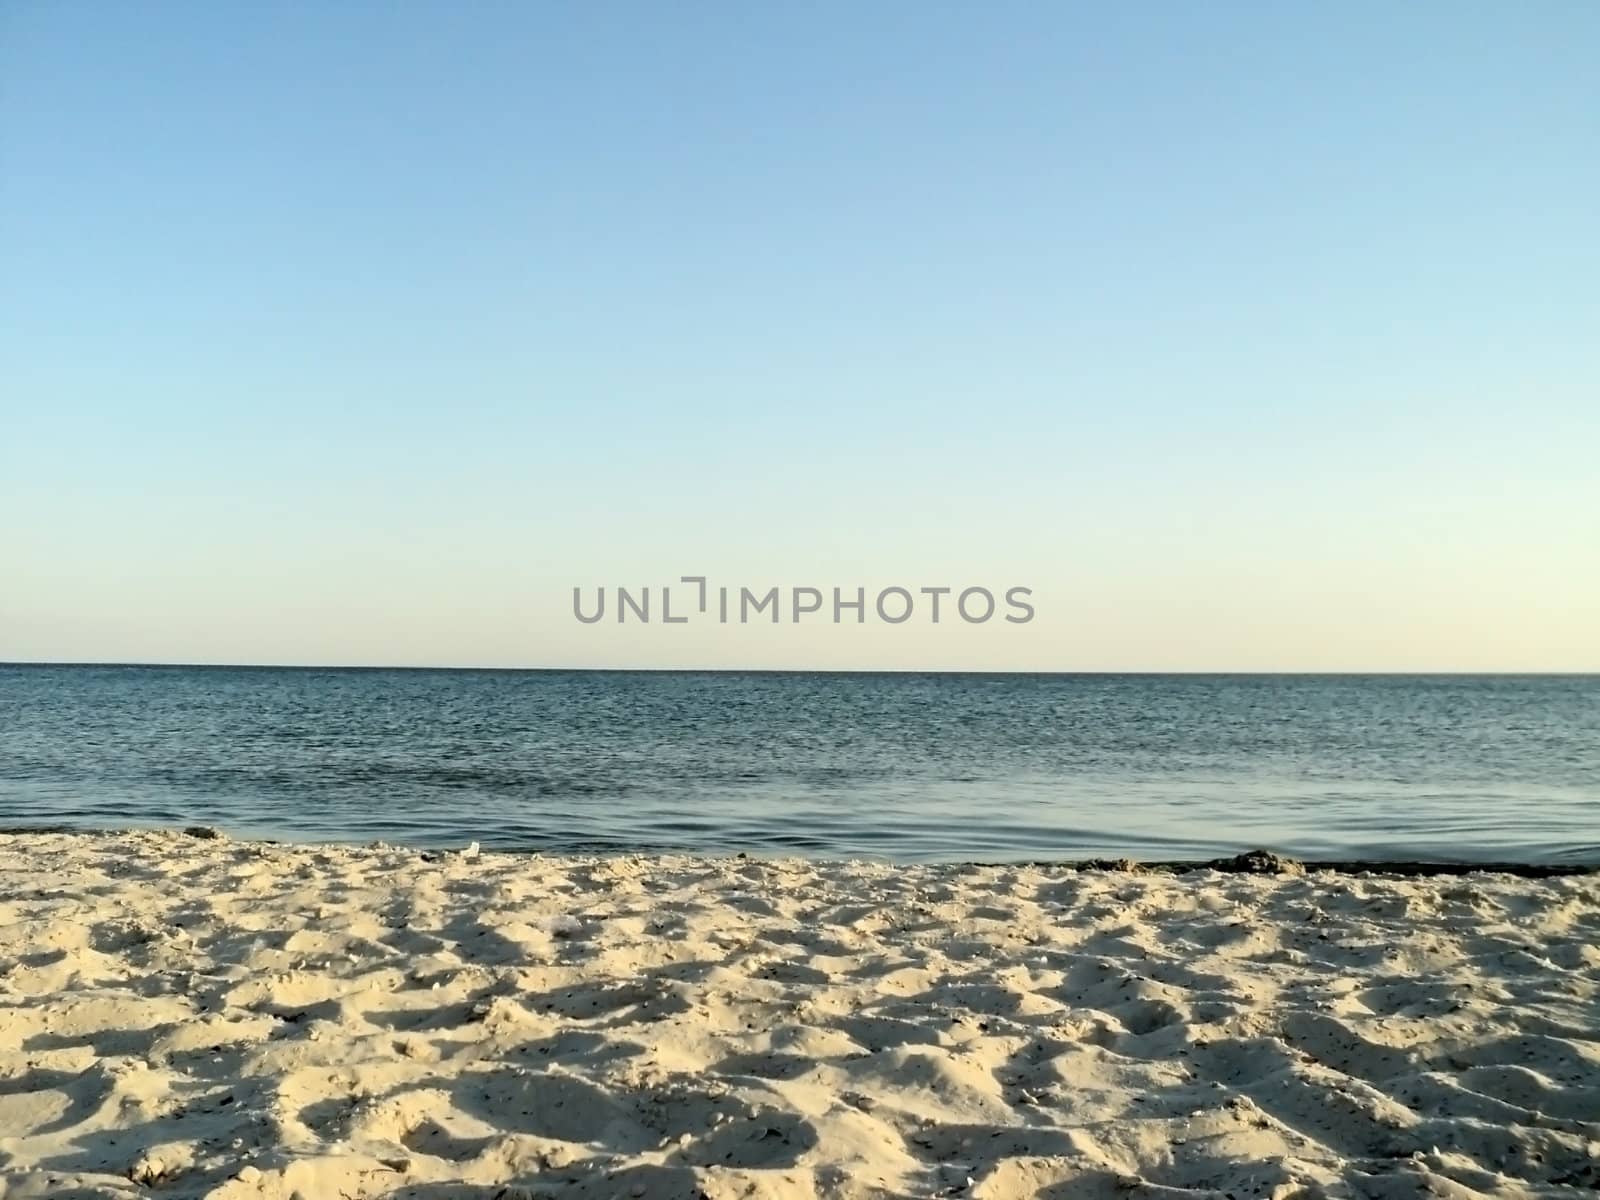           Seascape: general view of the desert of sandy beach and the sea                     